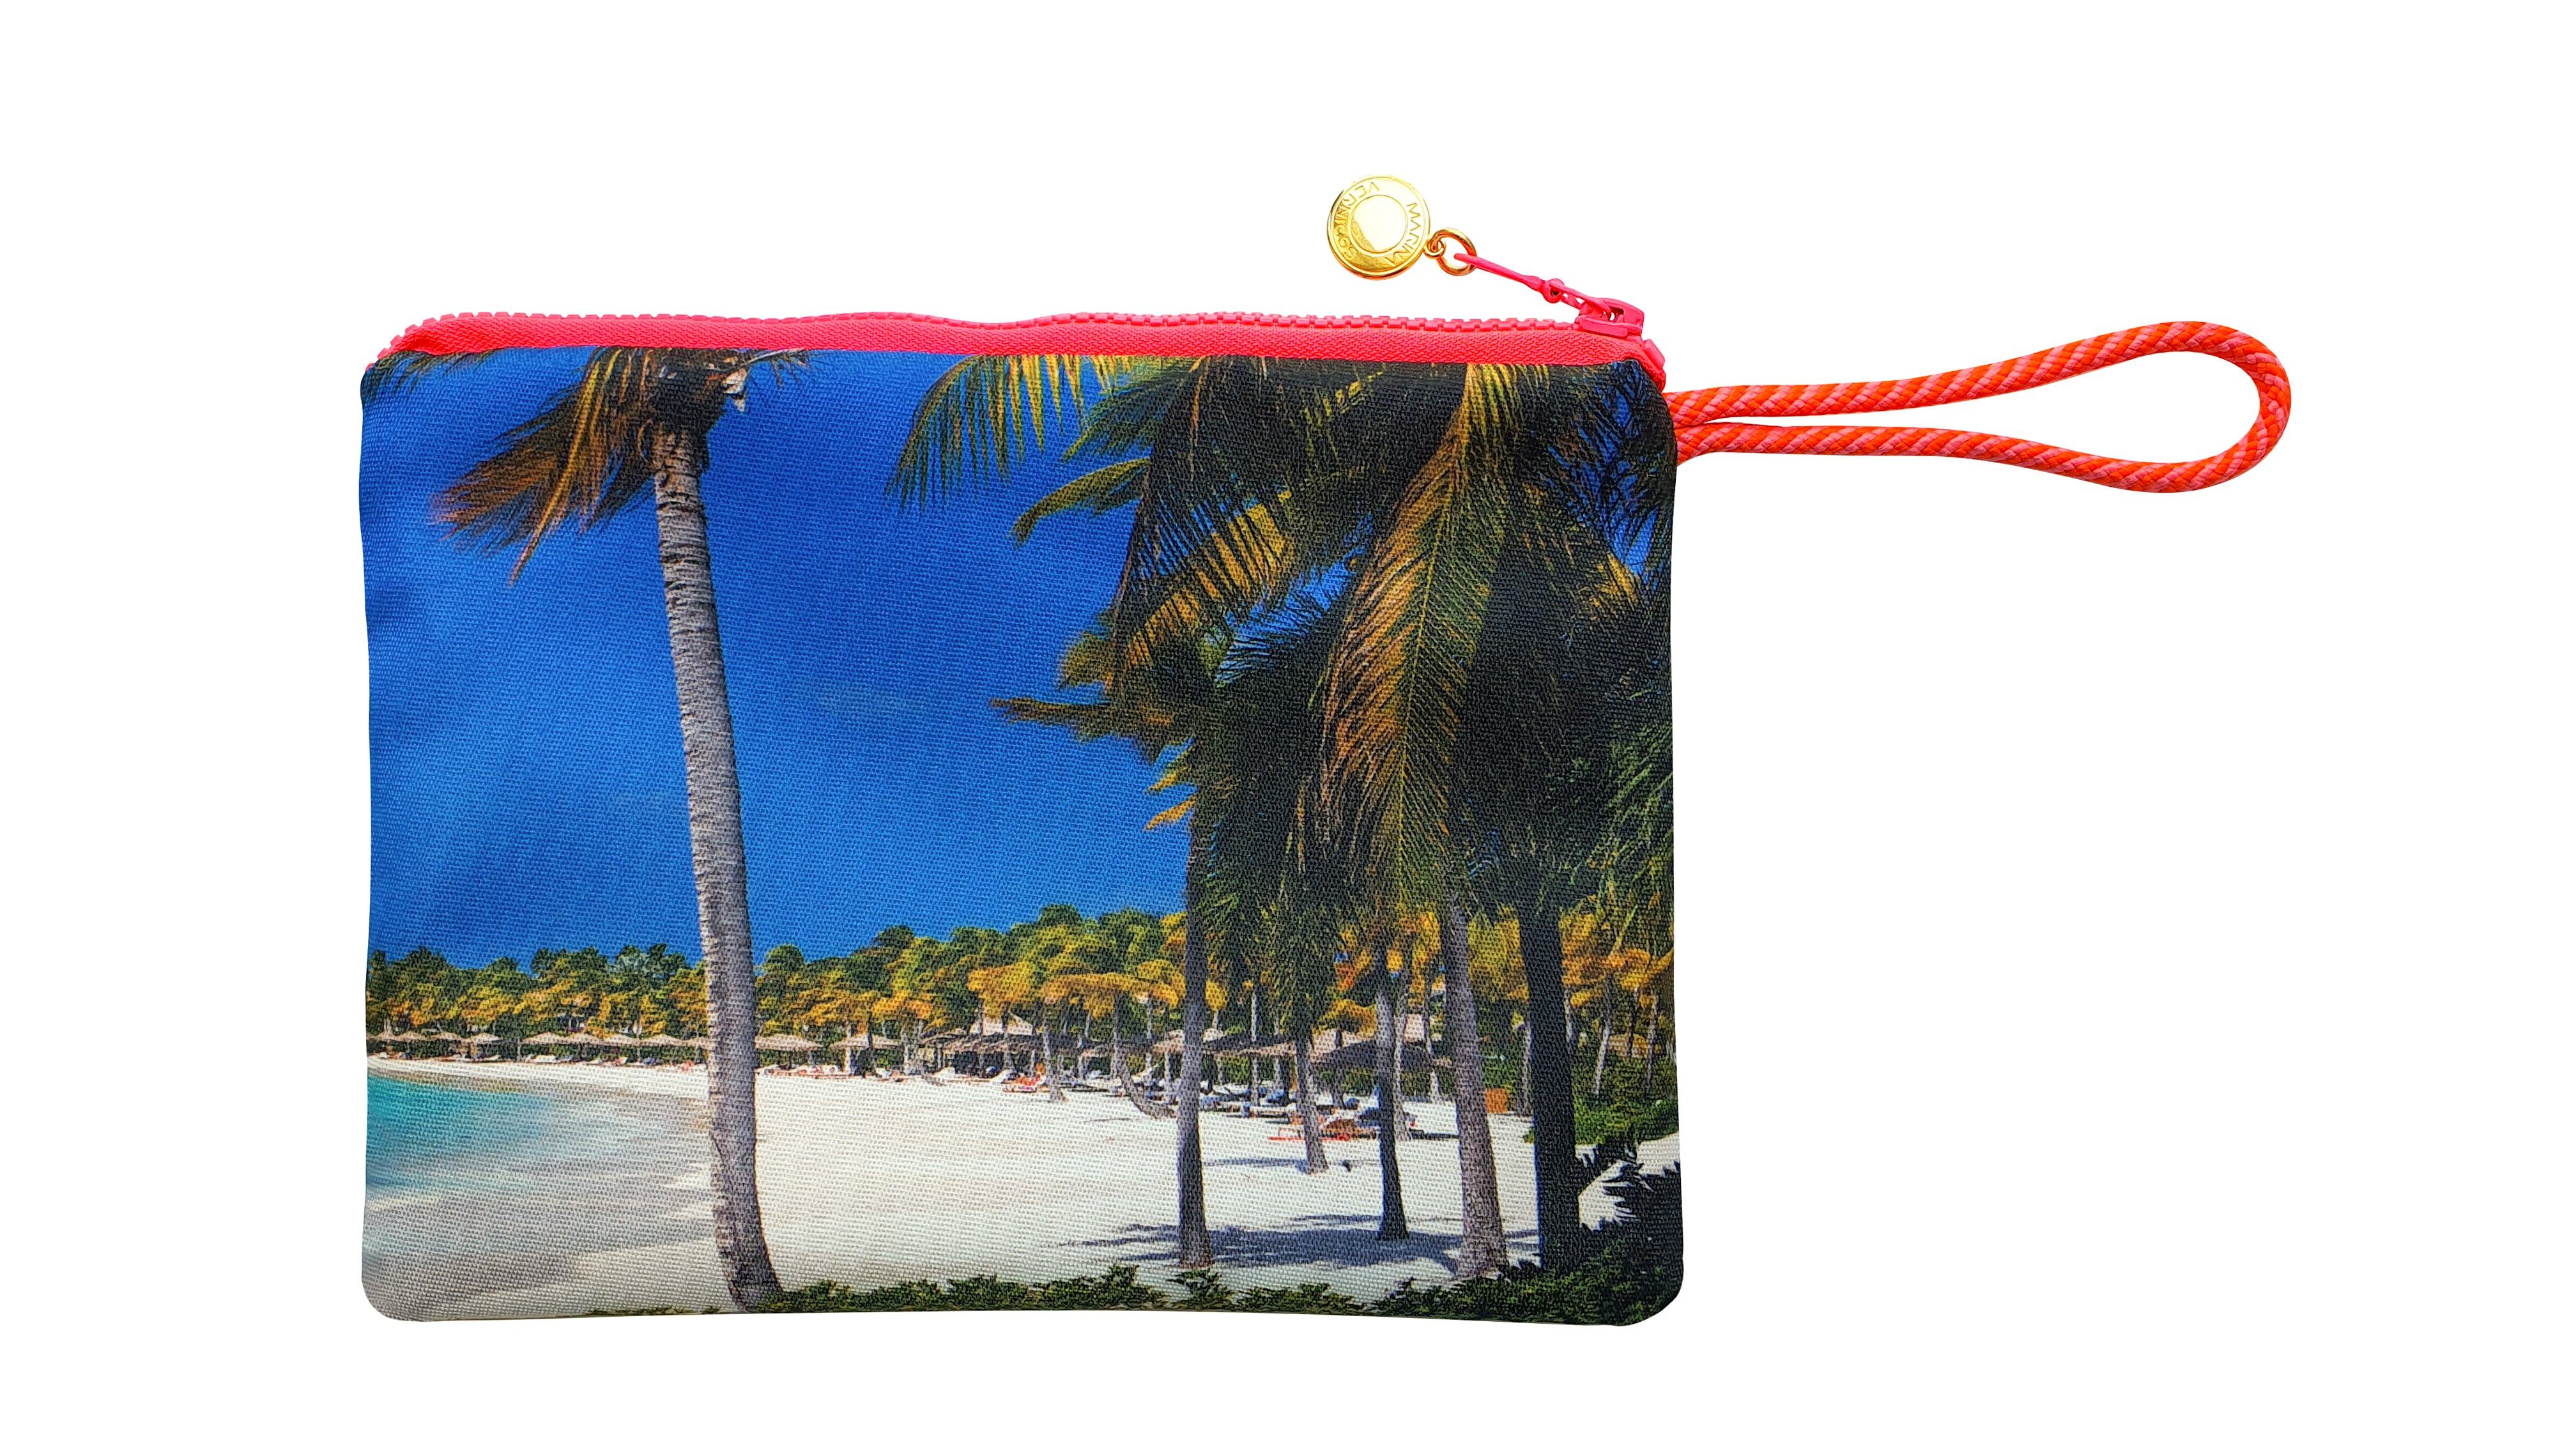 Marina Vernicos Jumby Bay Island Waterproof Beach Pouch - Oekter Collection Hotels Boutique